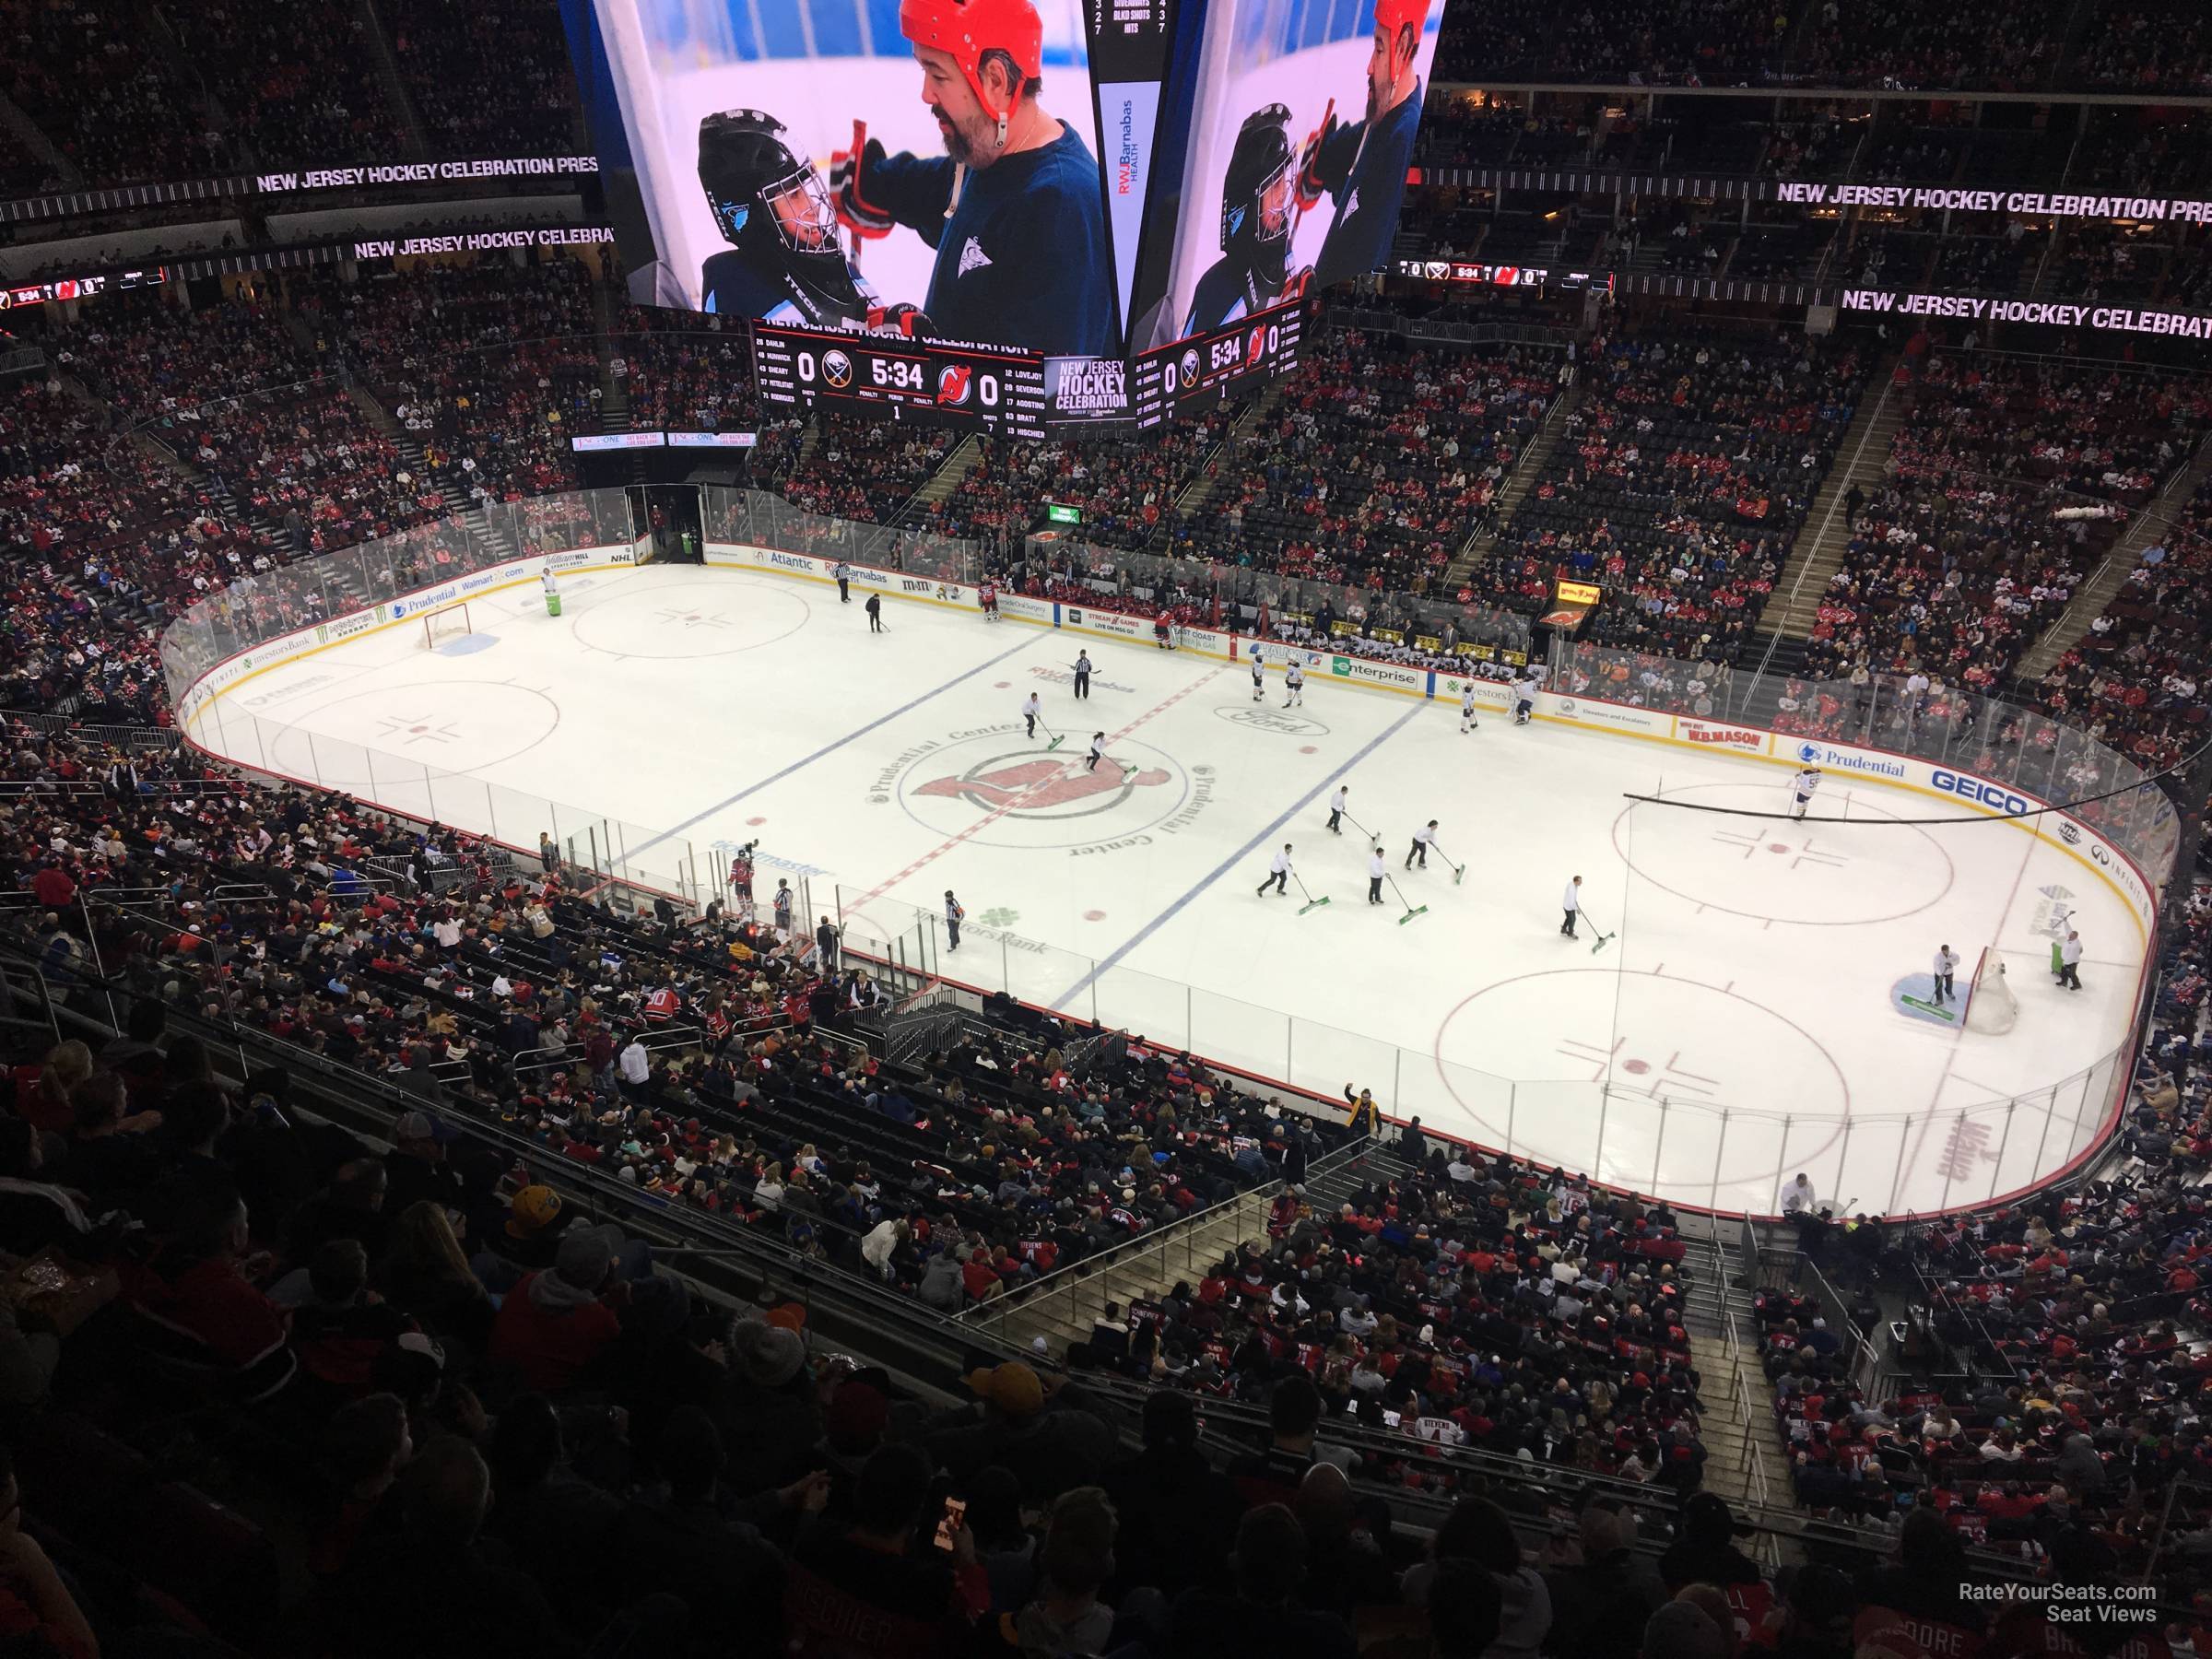 Section 13 at Prudential Center 